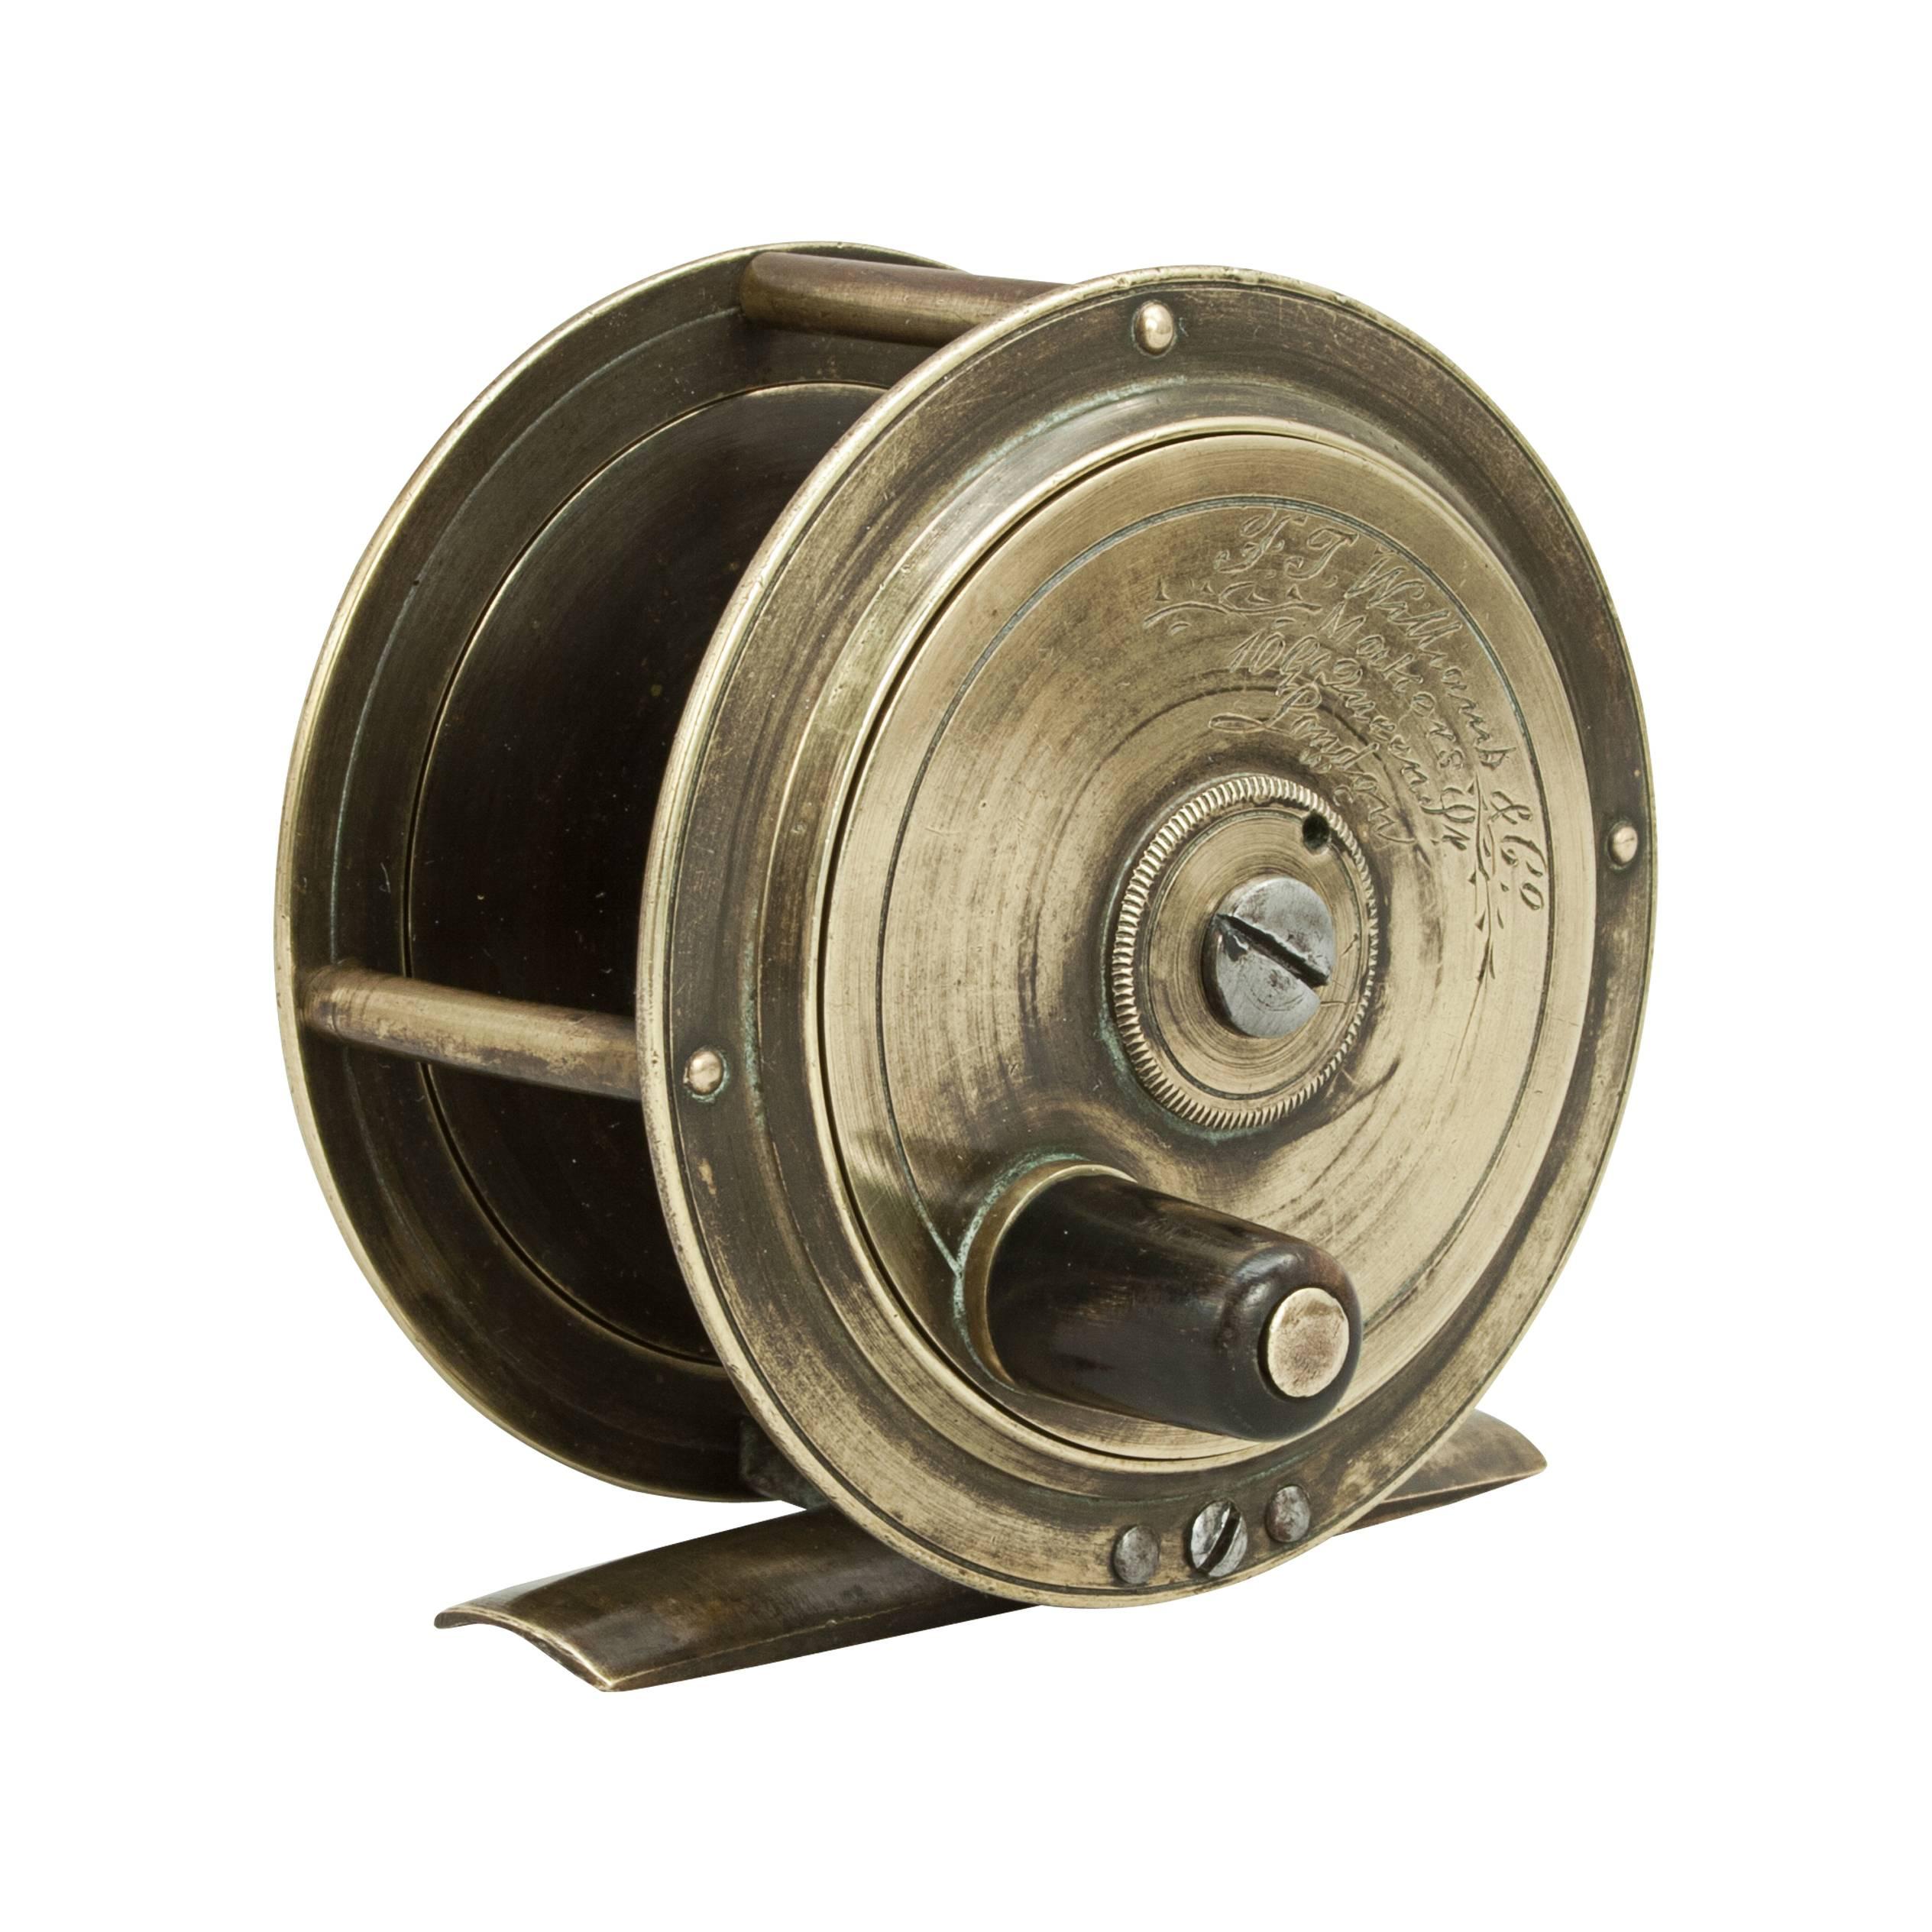 A fine trout fly fishing reel by F.J Williams of 109 Queen Street London. This is a nice quality reel with good quality engraving on the winding plate. ' F.J. Williams & Co. Makers, 109 Queen Street, London'.
   